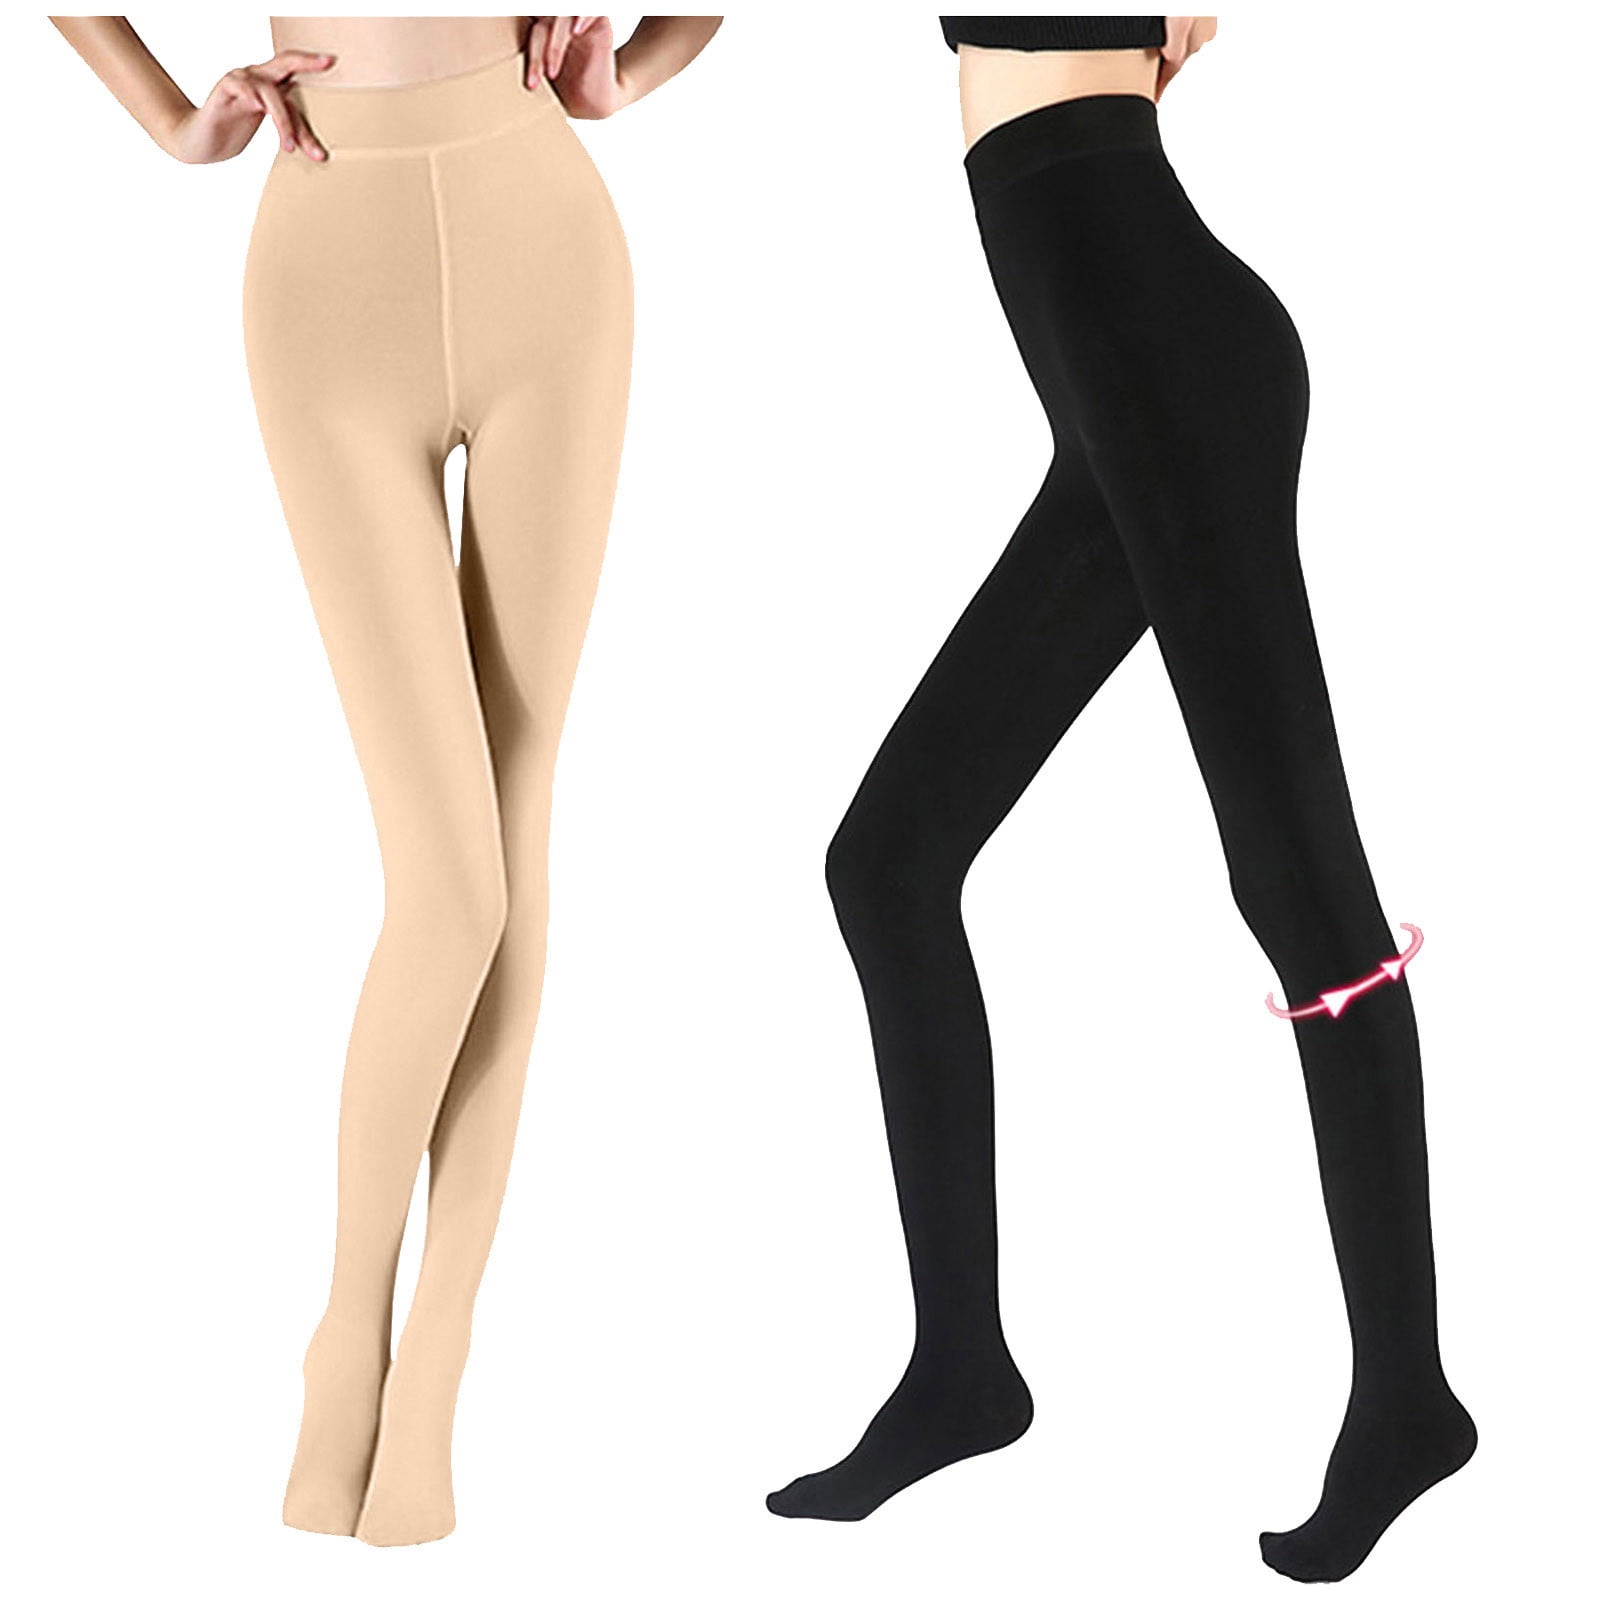 Women's Plus Size Leggings Warm Fleece Lined Pantyhose High Waist Slim  Stretchy Tights for Winter Match with Dress Coffee 320g Stockings